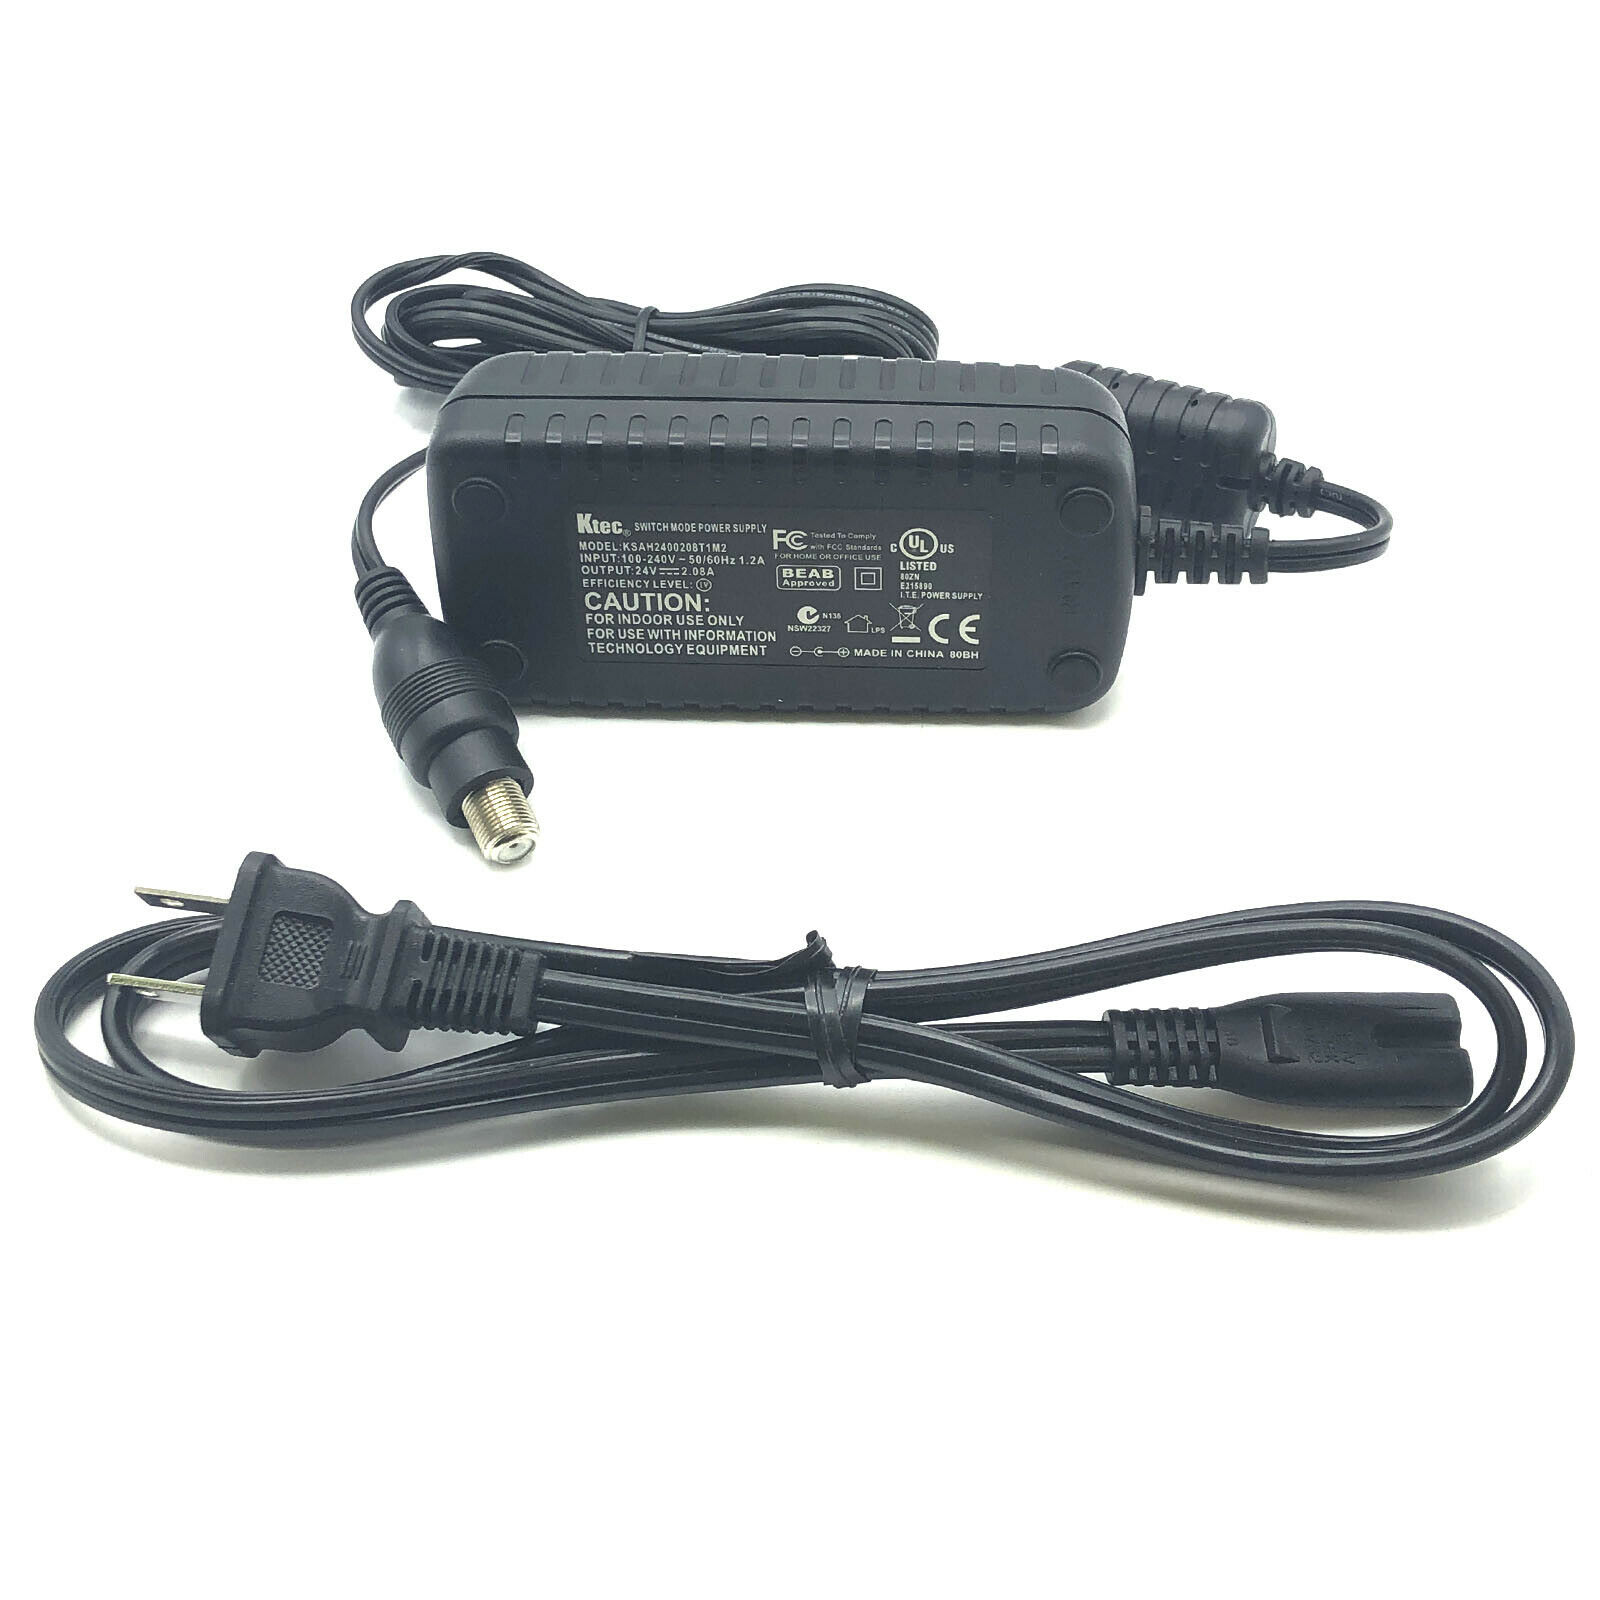 Genuine Ktec KSAH2400208T1M2 Switch Mode Power Supply Adapter 24V 2.08A w/PC Connection Split/Duplication: 1:1 Type: - Click Image to Close